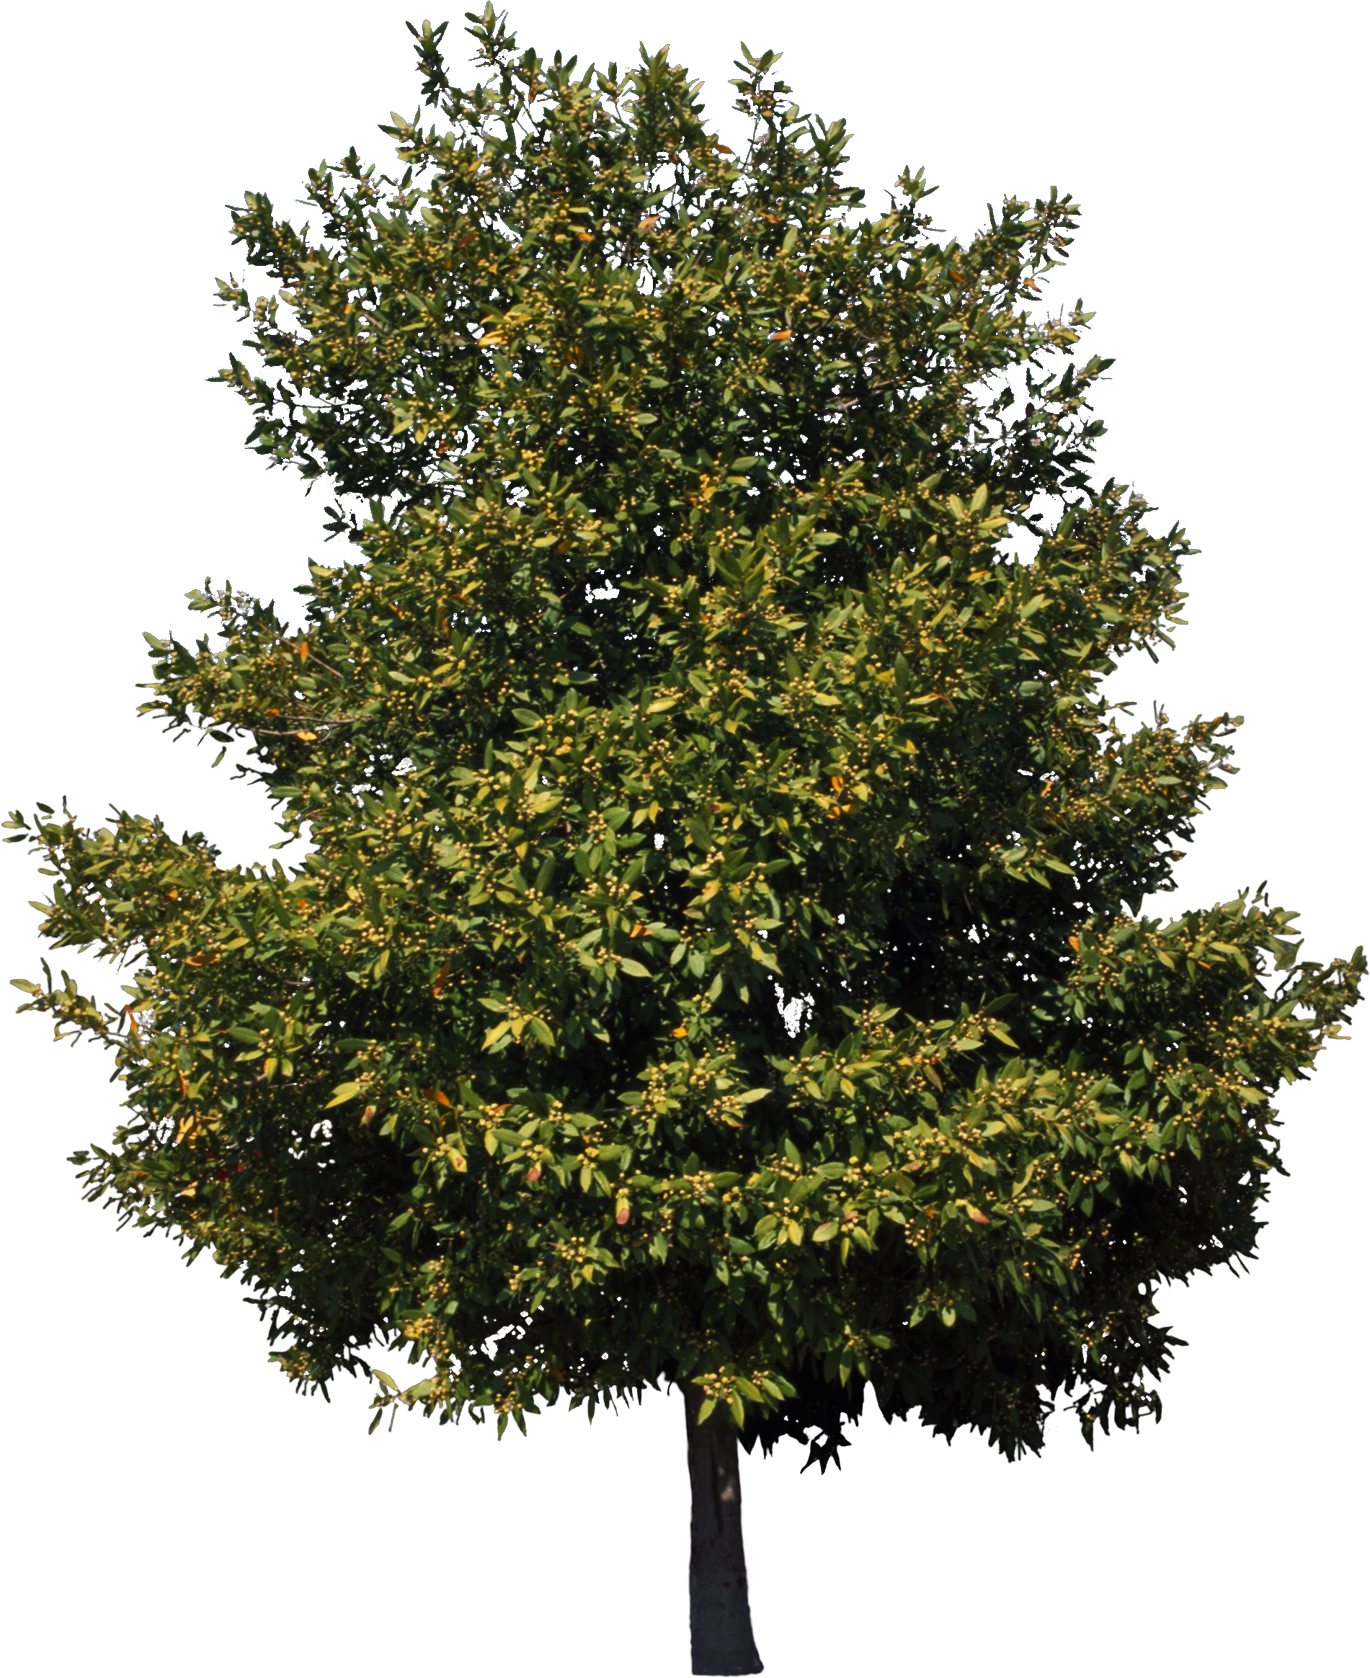 leaf clipart sycamore tree